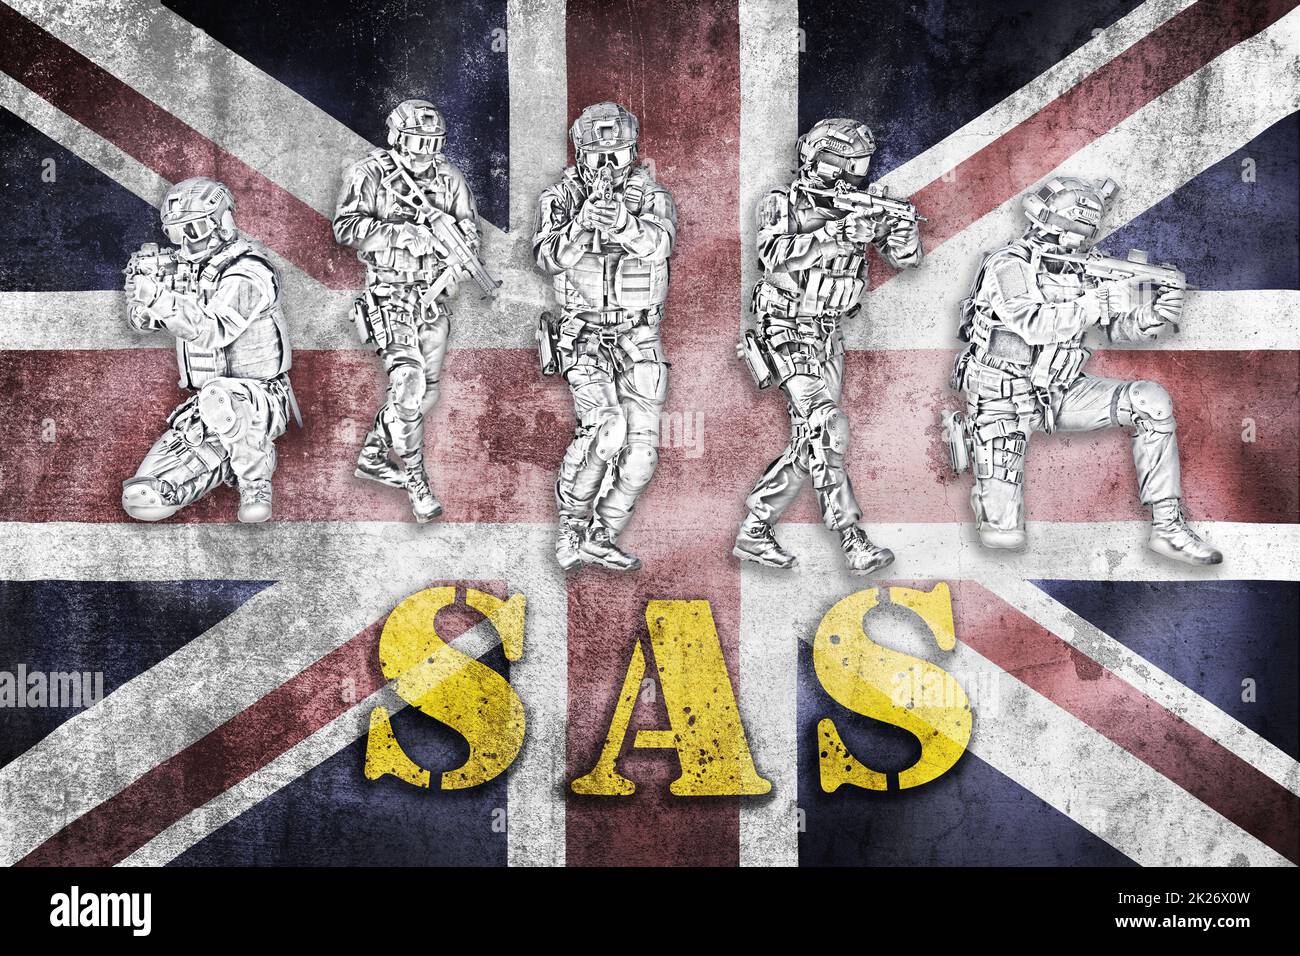 Special forces tactical team in action illustration on grunge UK flag with SAS letters, unmarked and unrecognizable swat team Stock Photo